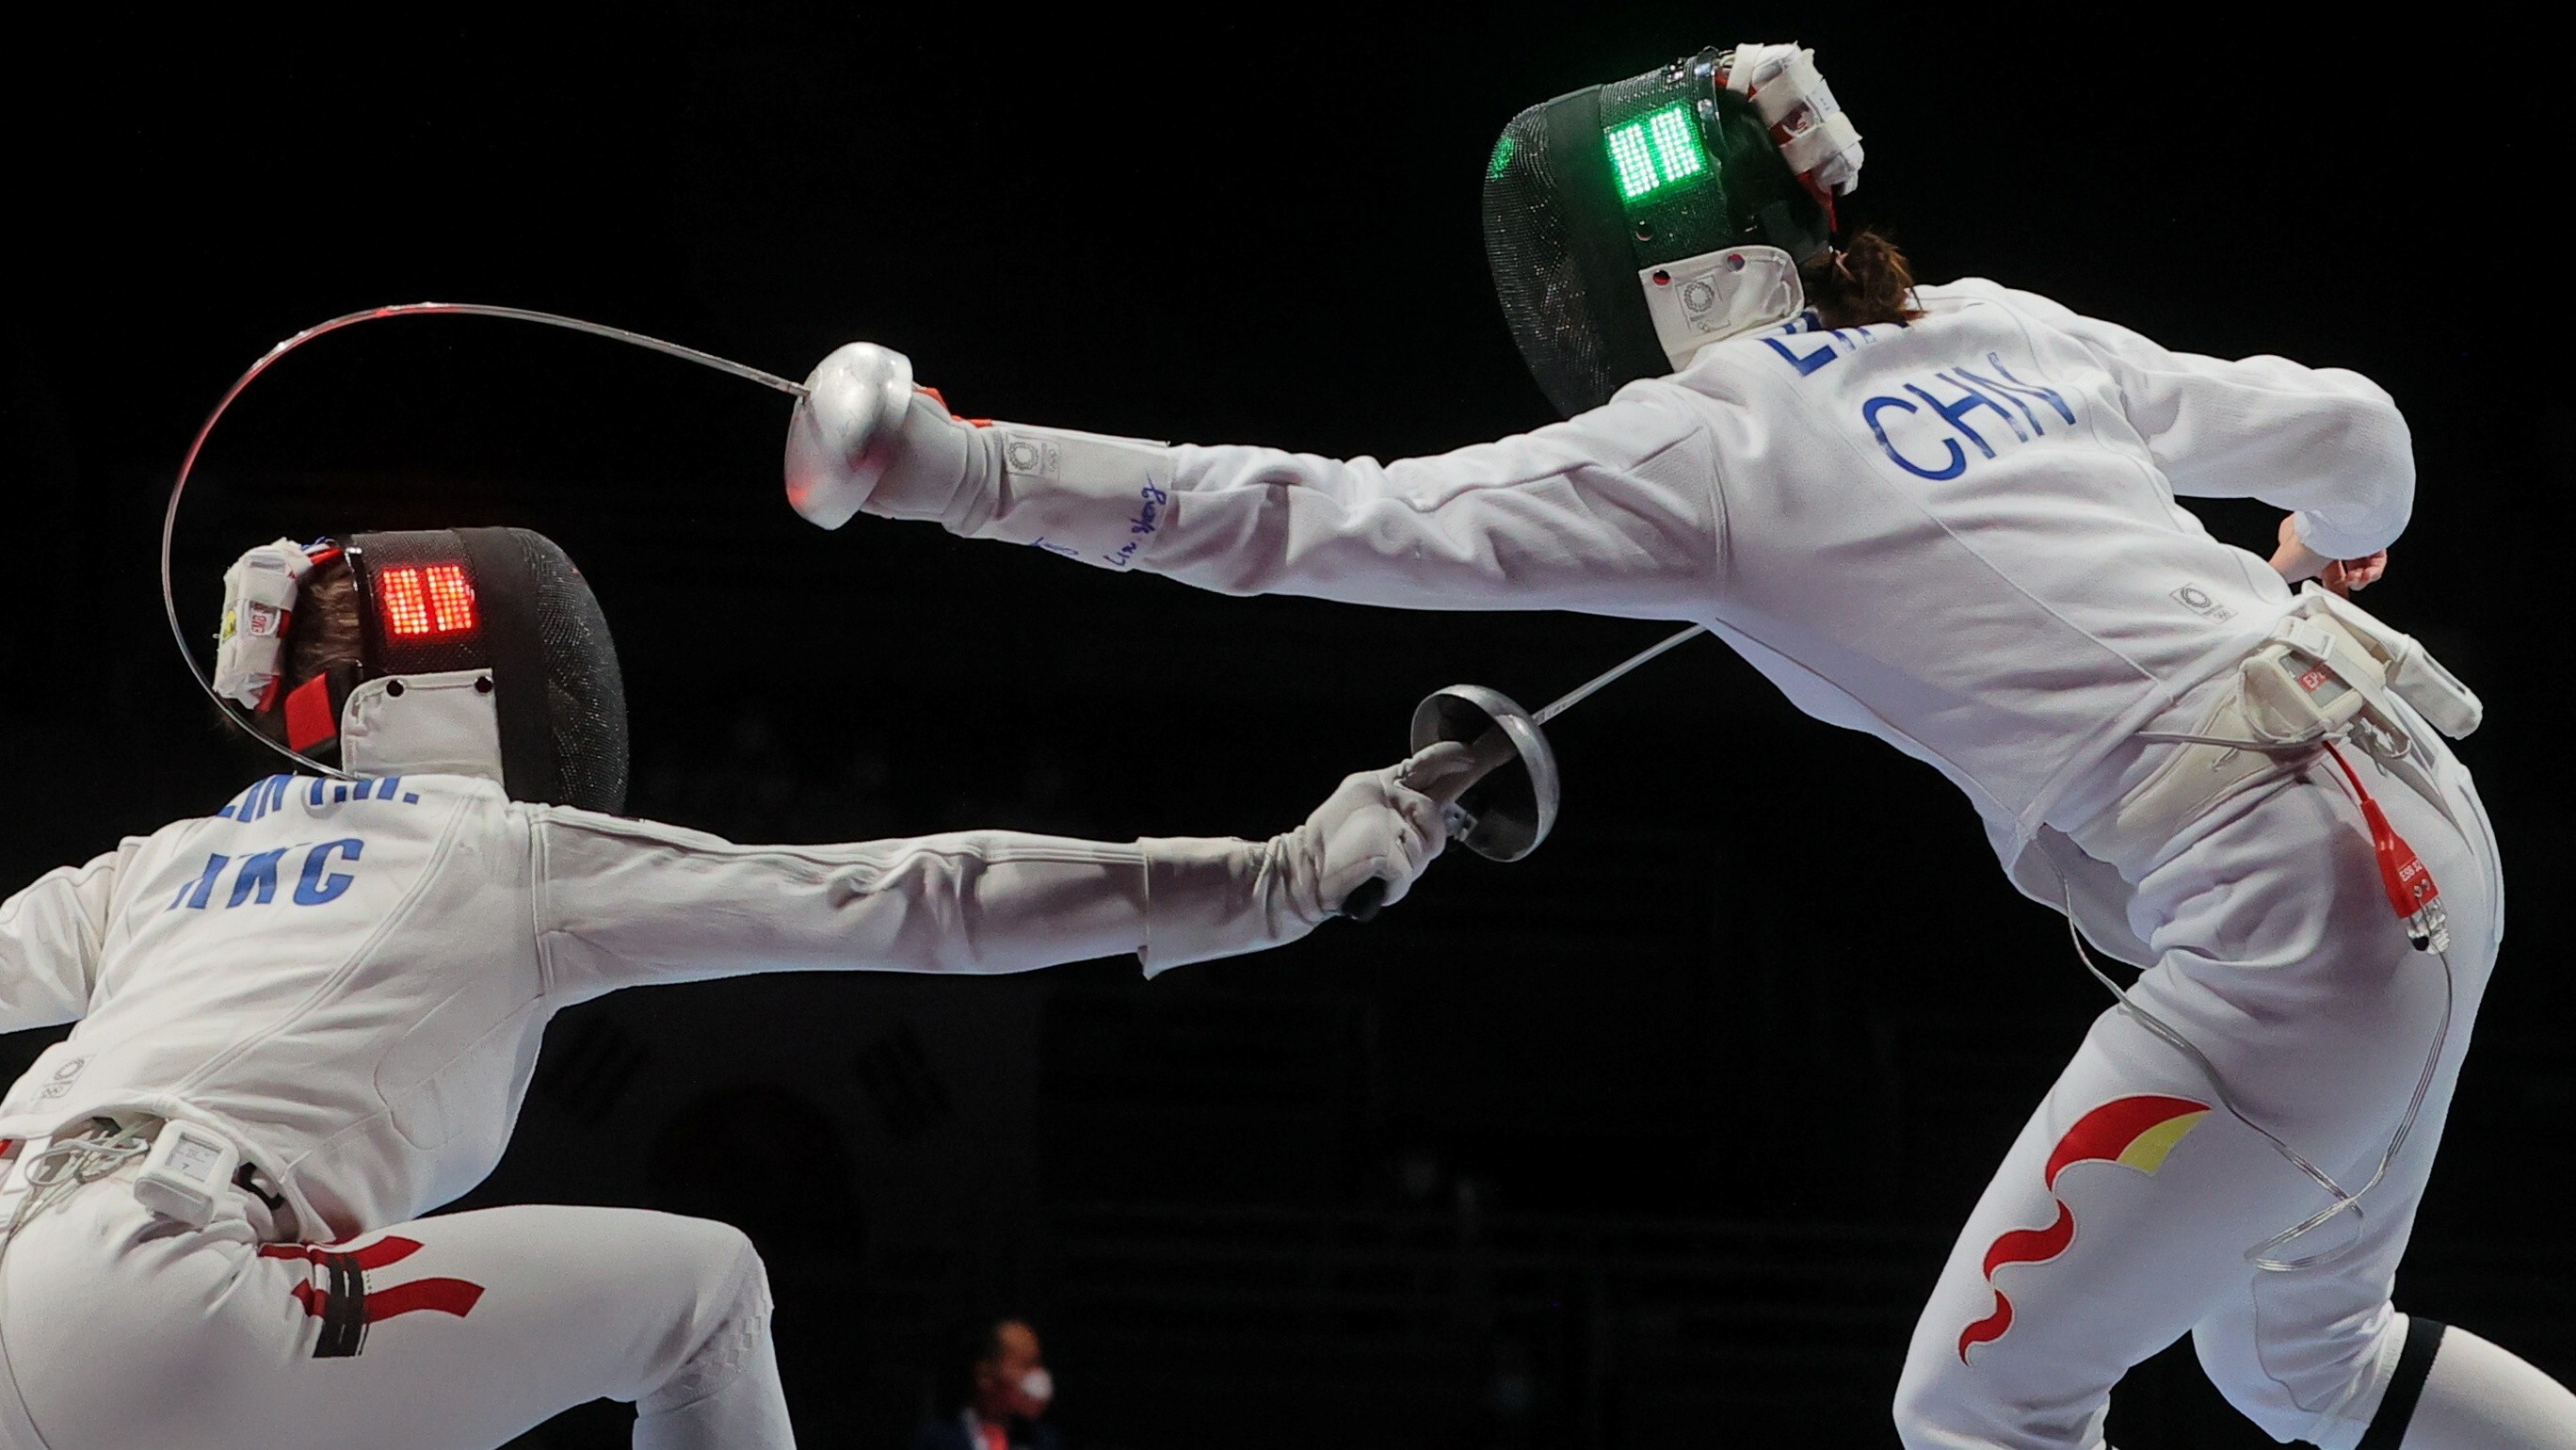 Hong Kong’s Coco Lin Yik-hei takes on China’s Lin Sheng in the women’s team épée at the Tokyo Olympics on Tuesday. Photo: REUTERS